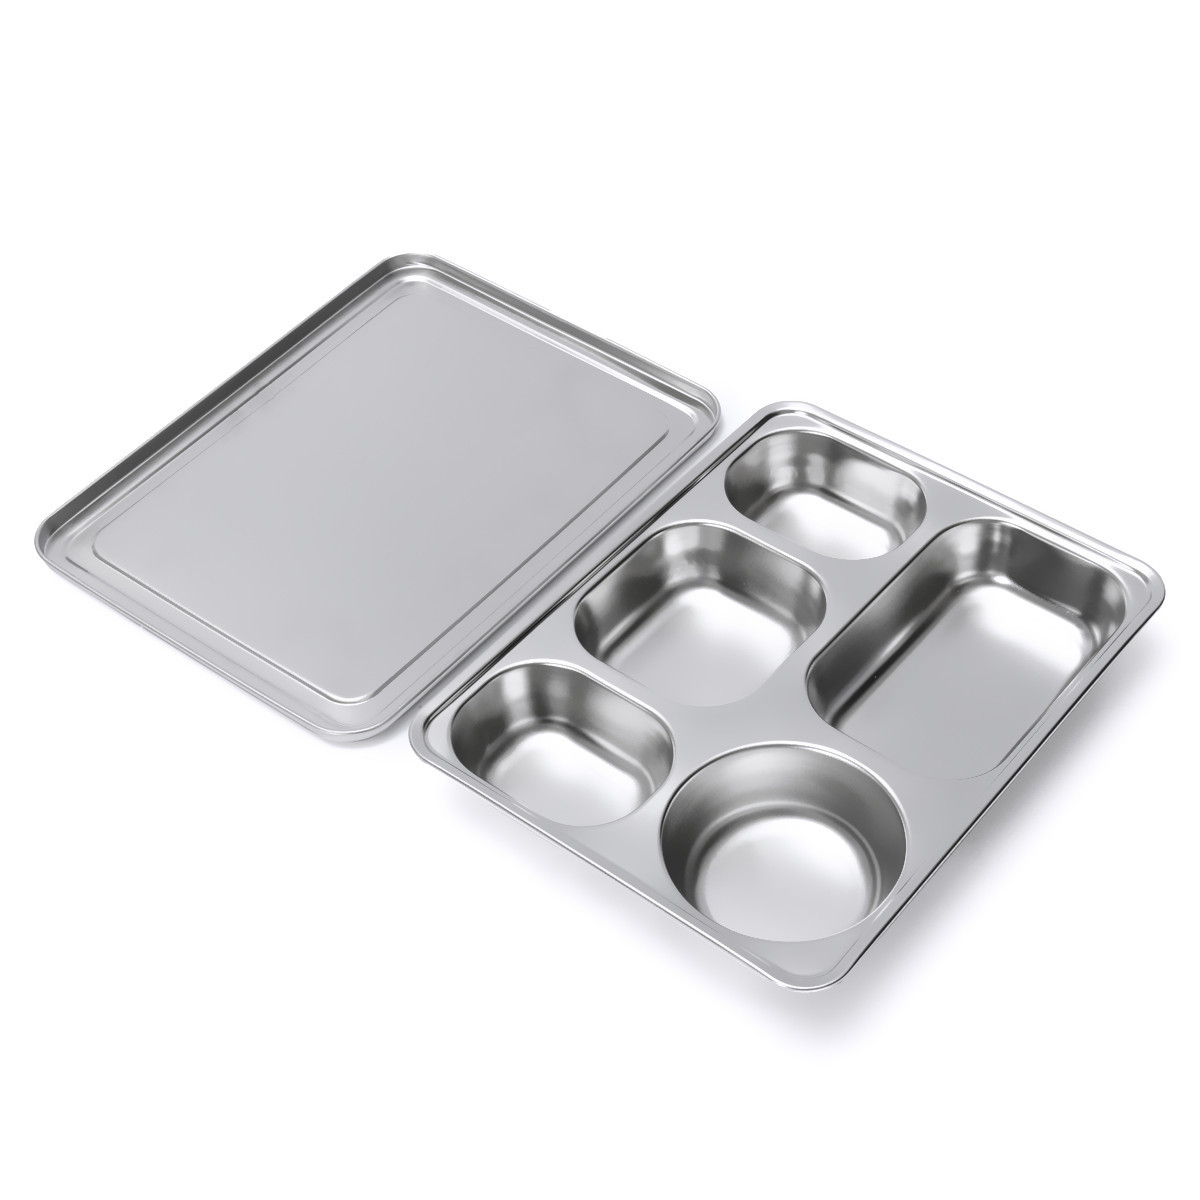 Stainless-Steel-Food-Serving-Tray-Canteen-Cafeteria-Divided-Lunch-Box-Bento-Container-with-Lid-1211432